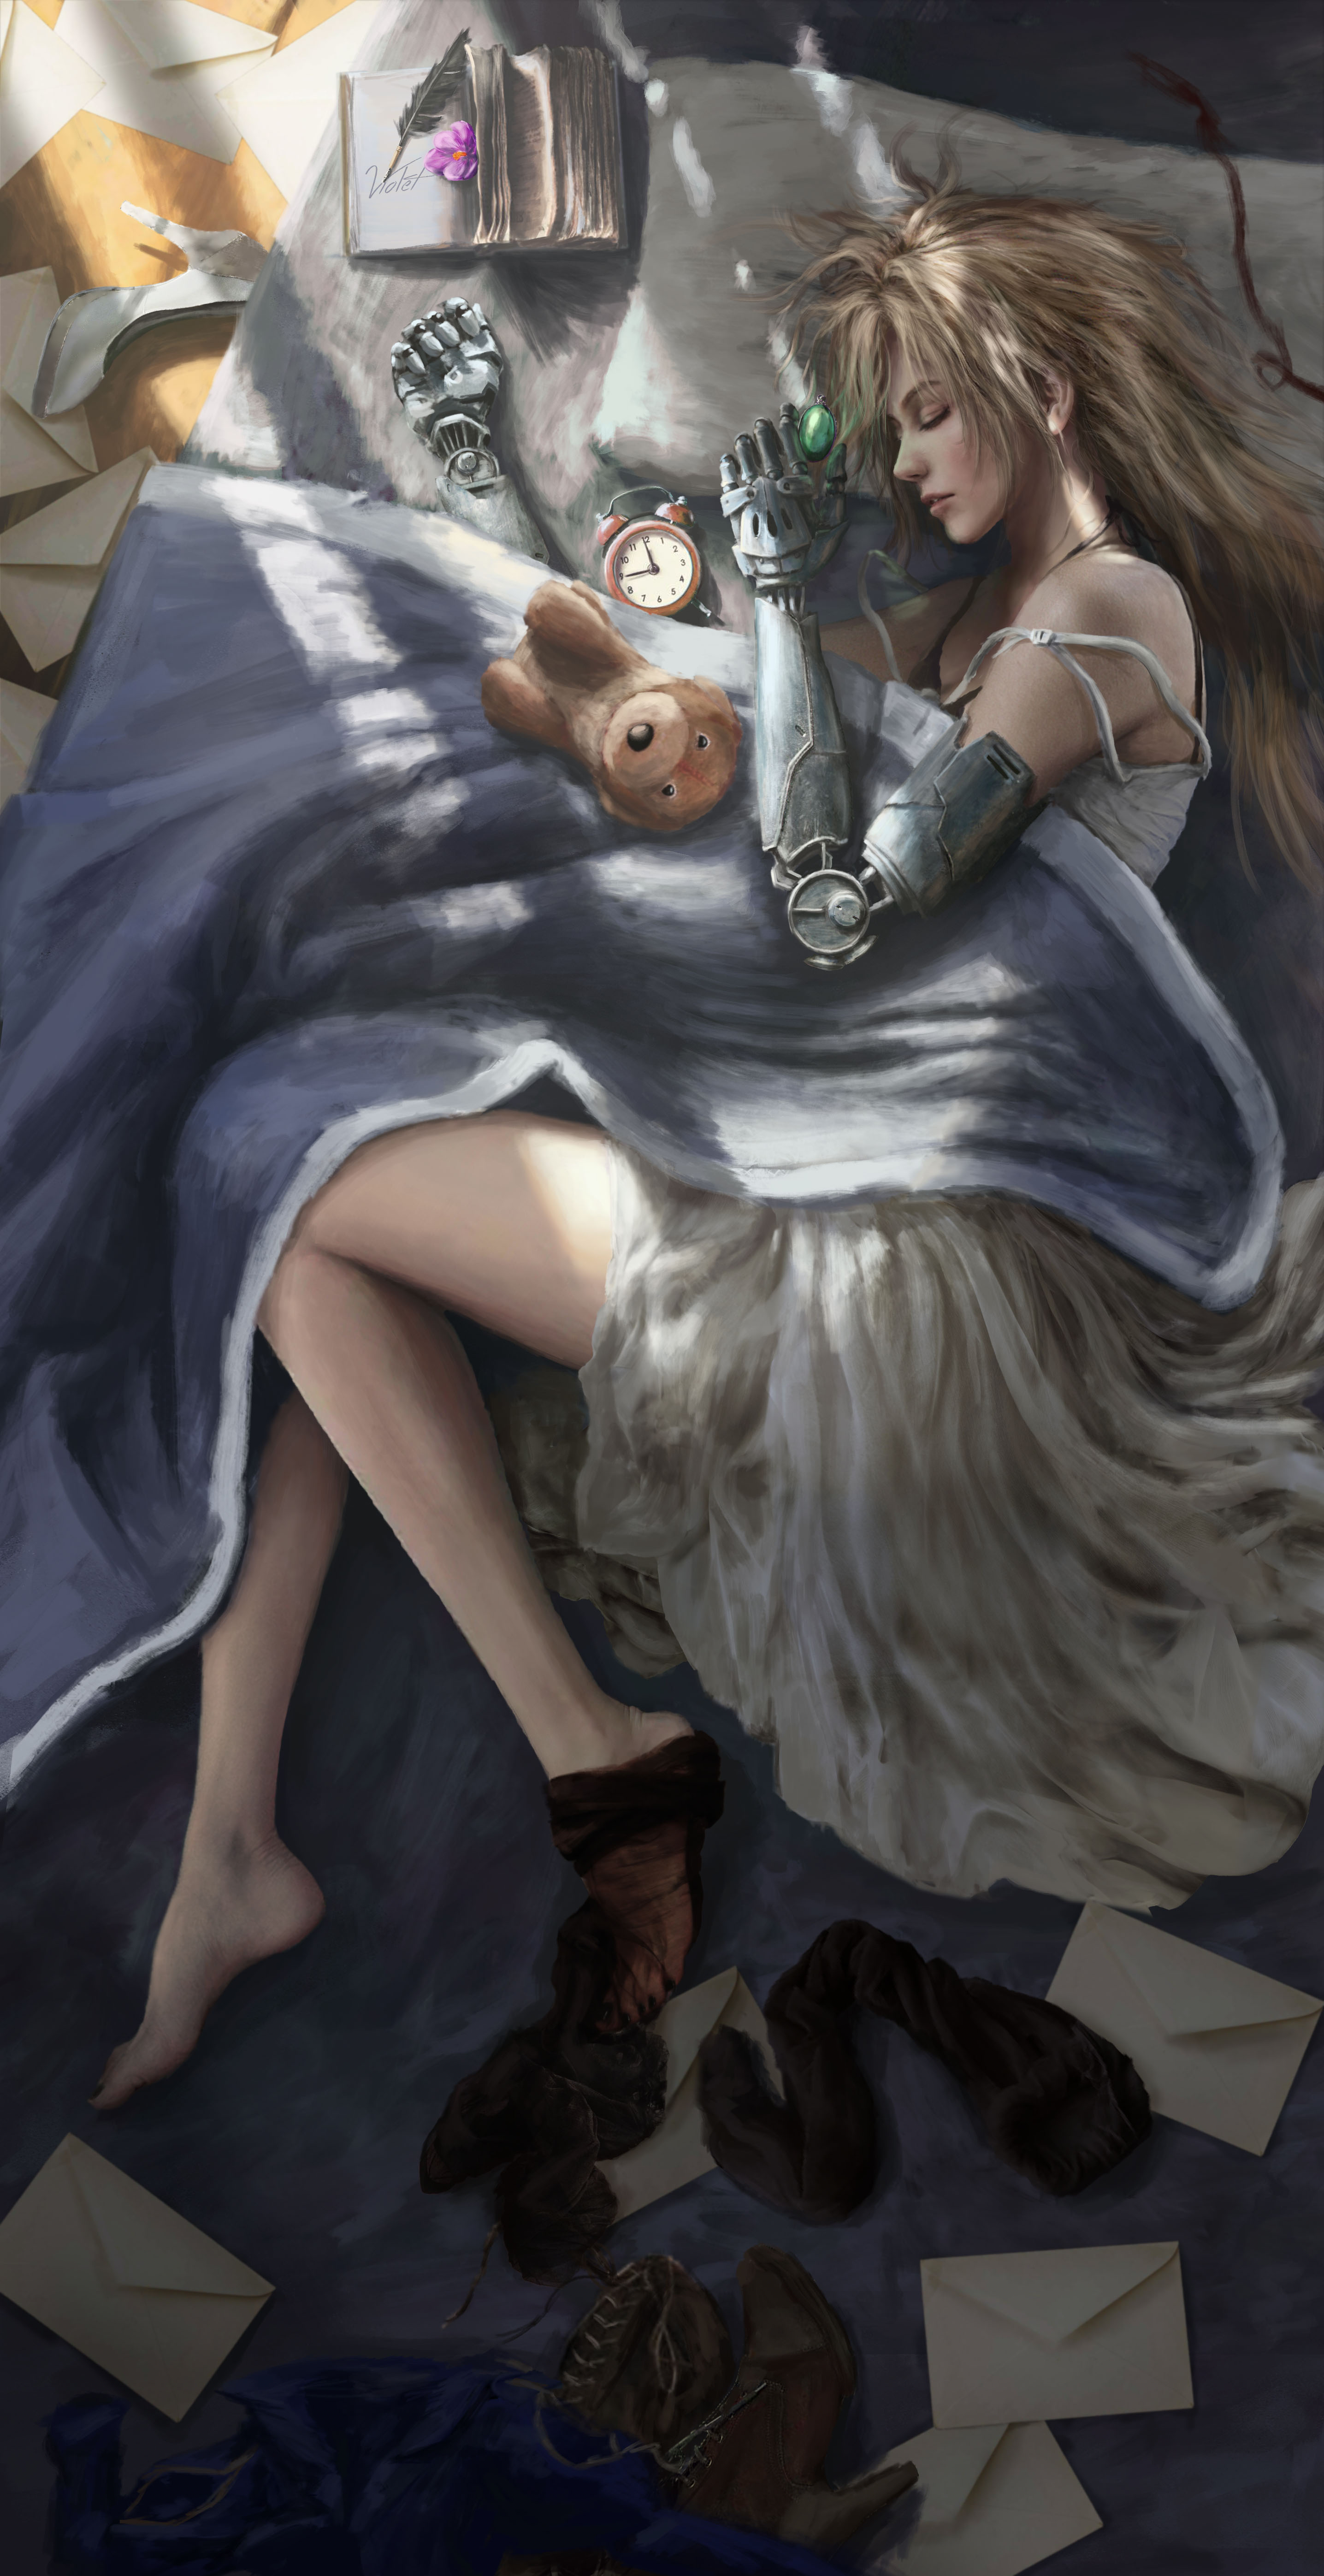 General 2872x5586 artwork science fiction women blonde Violet Evergarden (character) digital art portrait display lying down lying on side Violet Evergarden sleeping closed eyes teddy bears parted lips long hair messy hair clocks bed pillow heels sunlight pointed toes letter boots straps gemstones off shoulder in bed barefoot